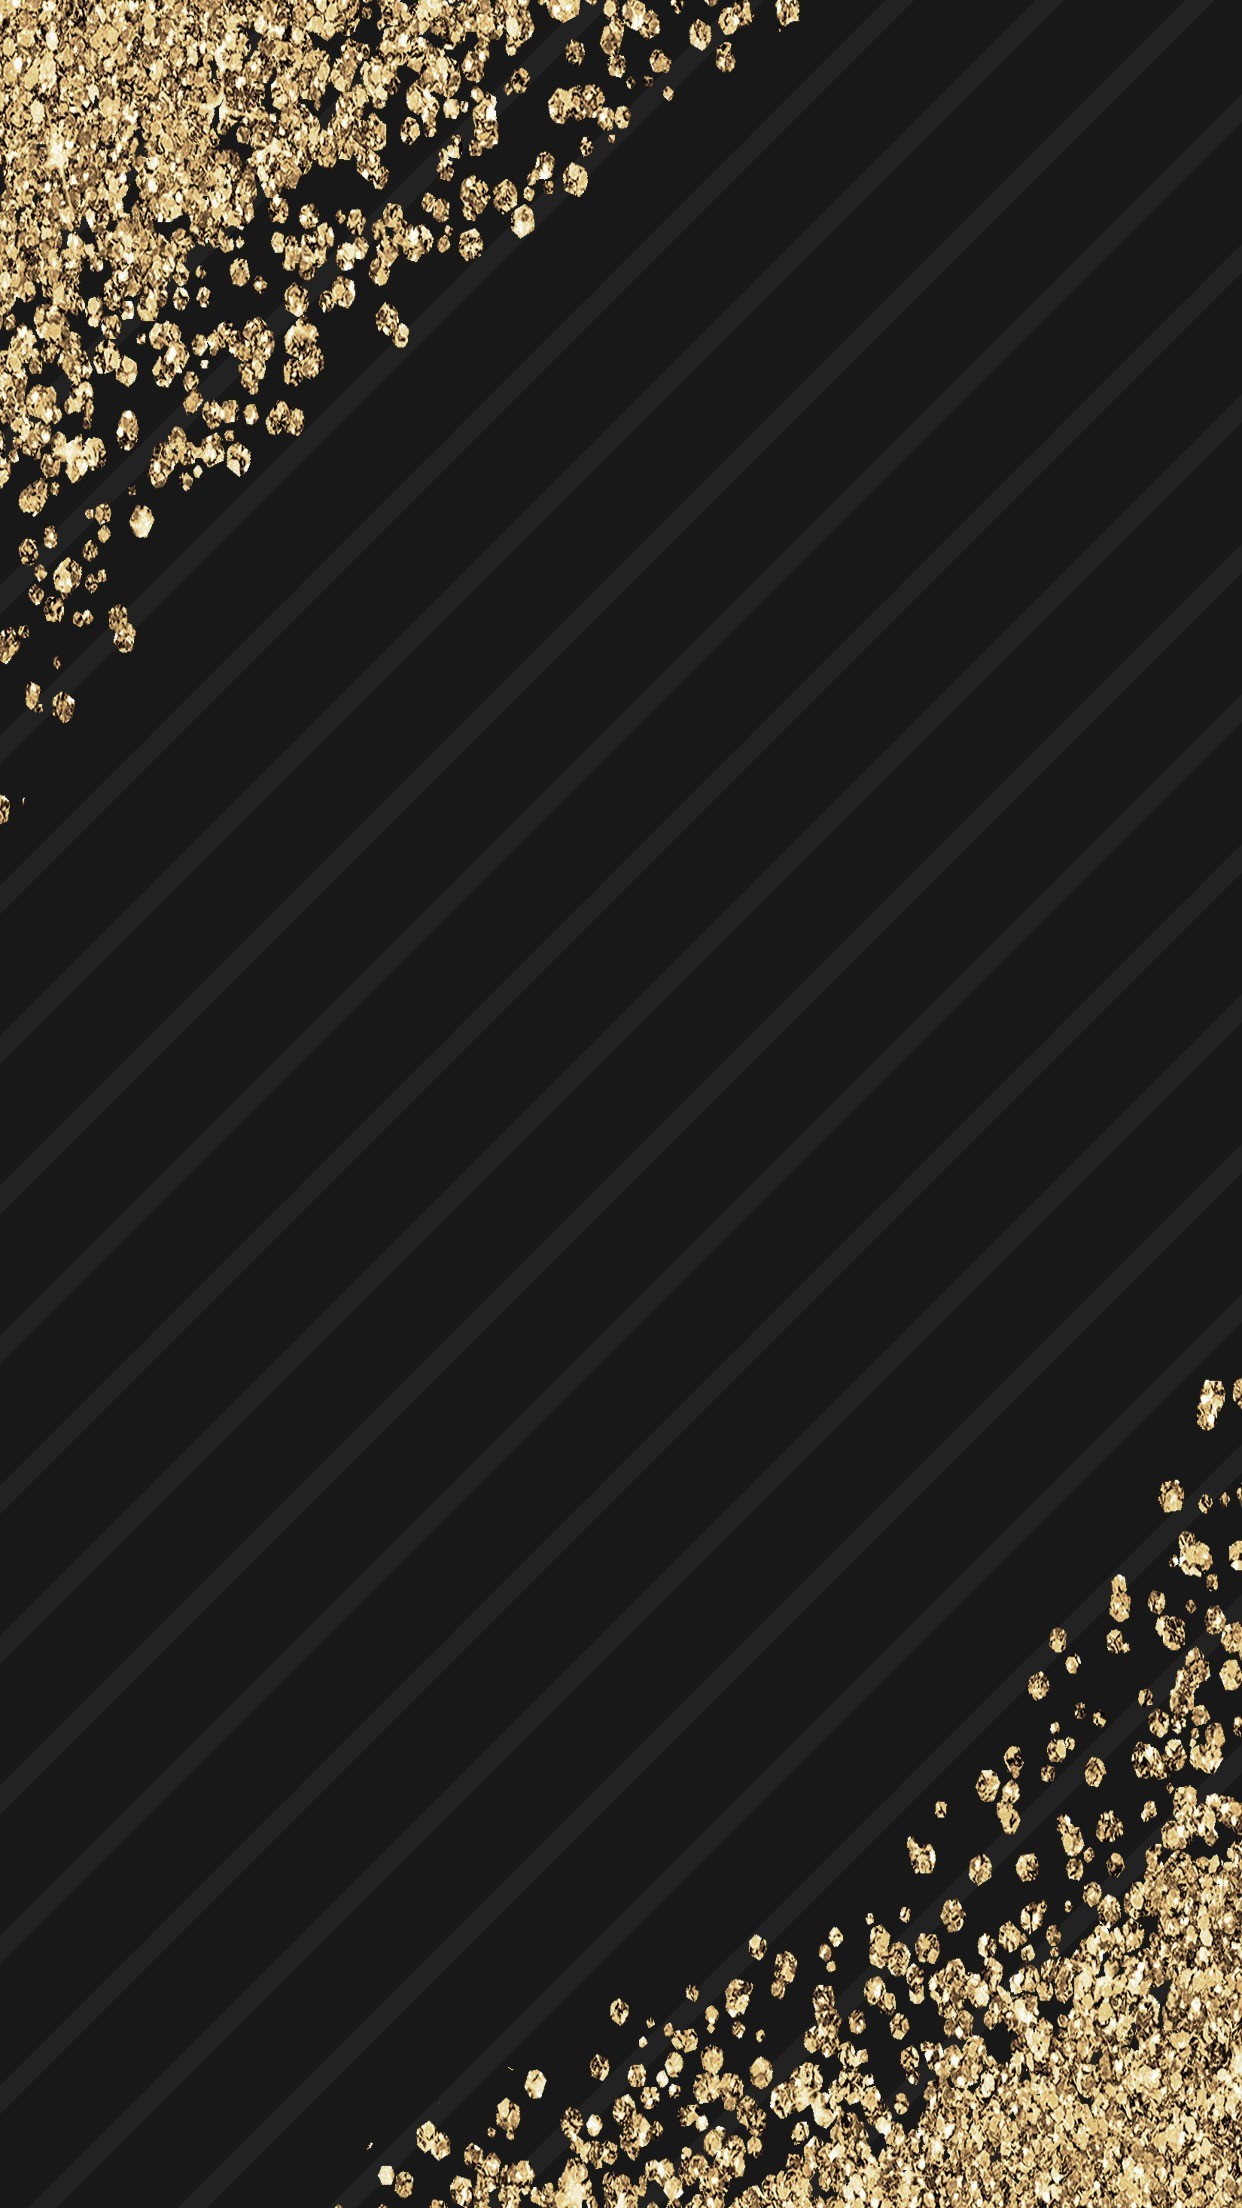 Black and Gold iPhone Wallpaper (72+ images)